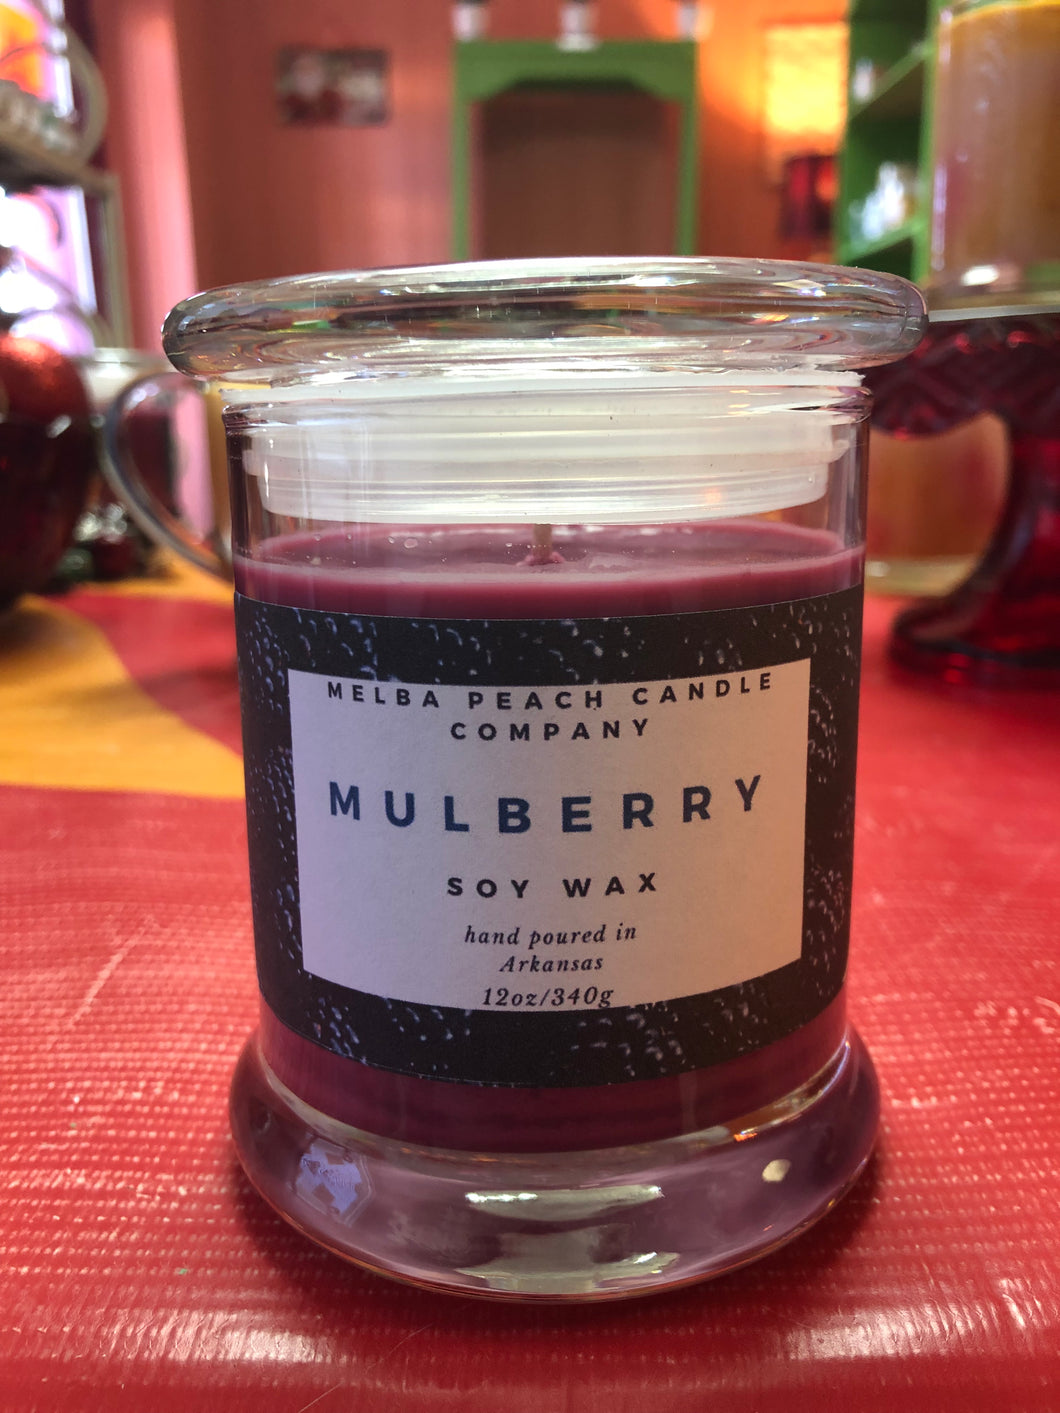 Mulberry Soywax Candle 12oz